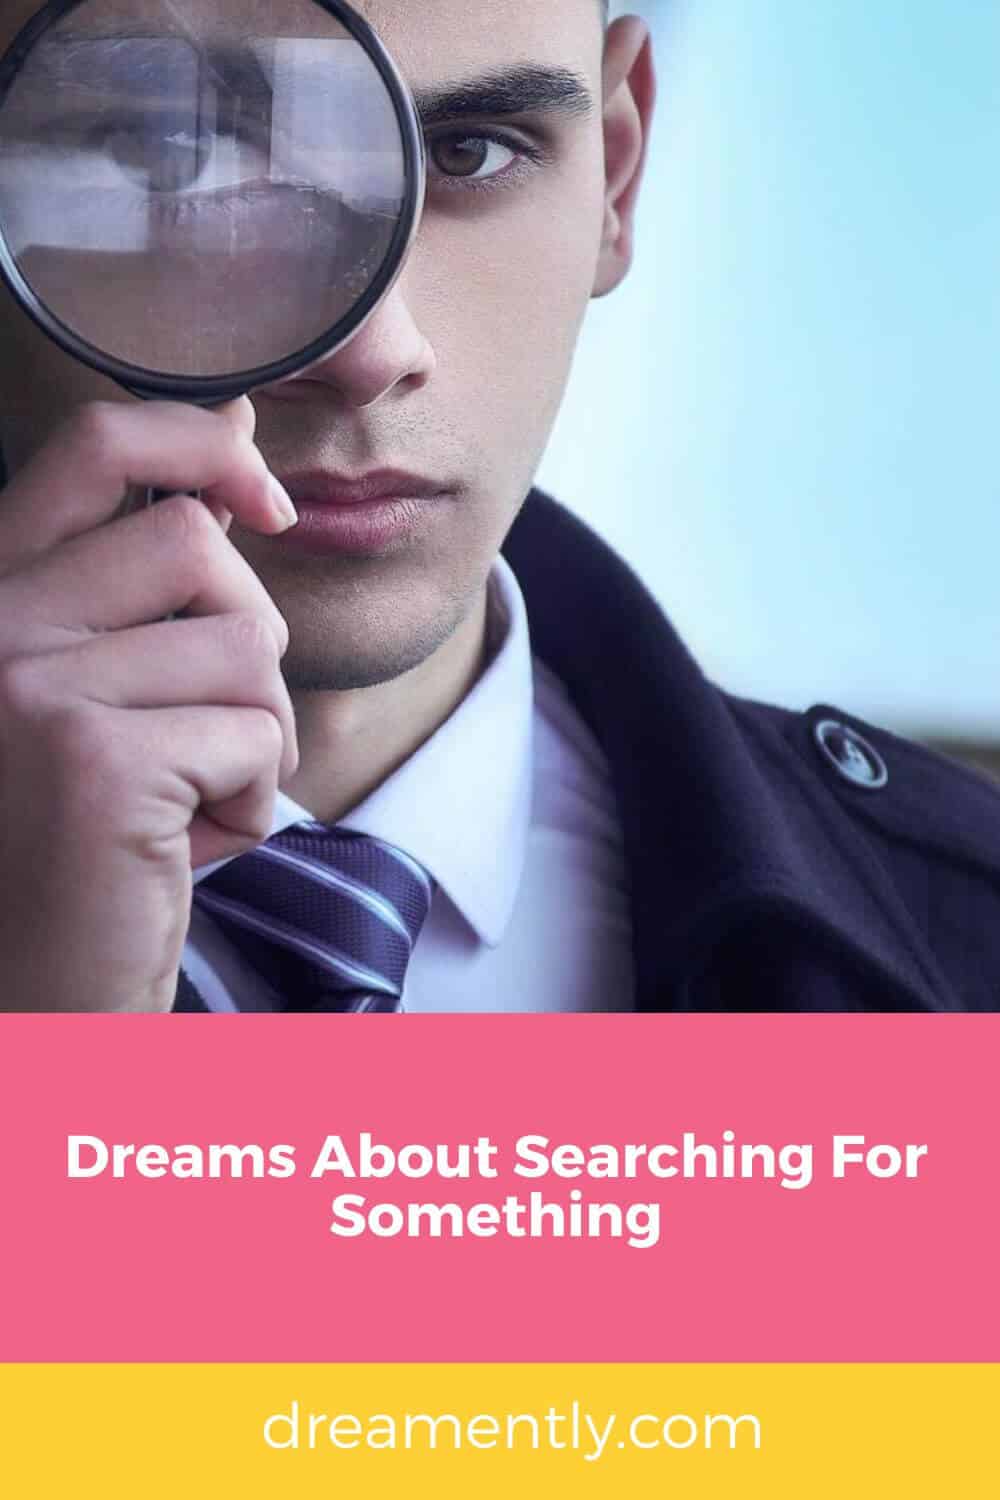 Dreams About Searching For Something (2)